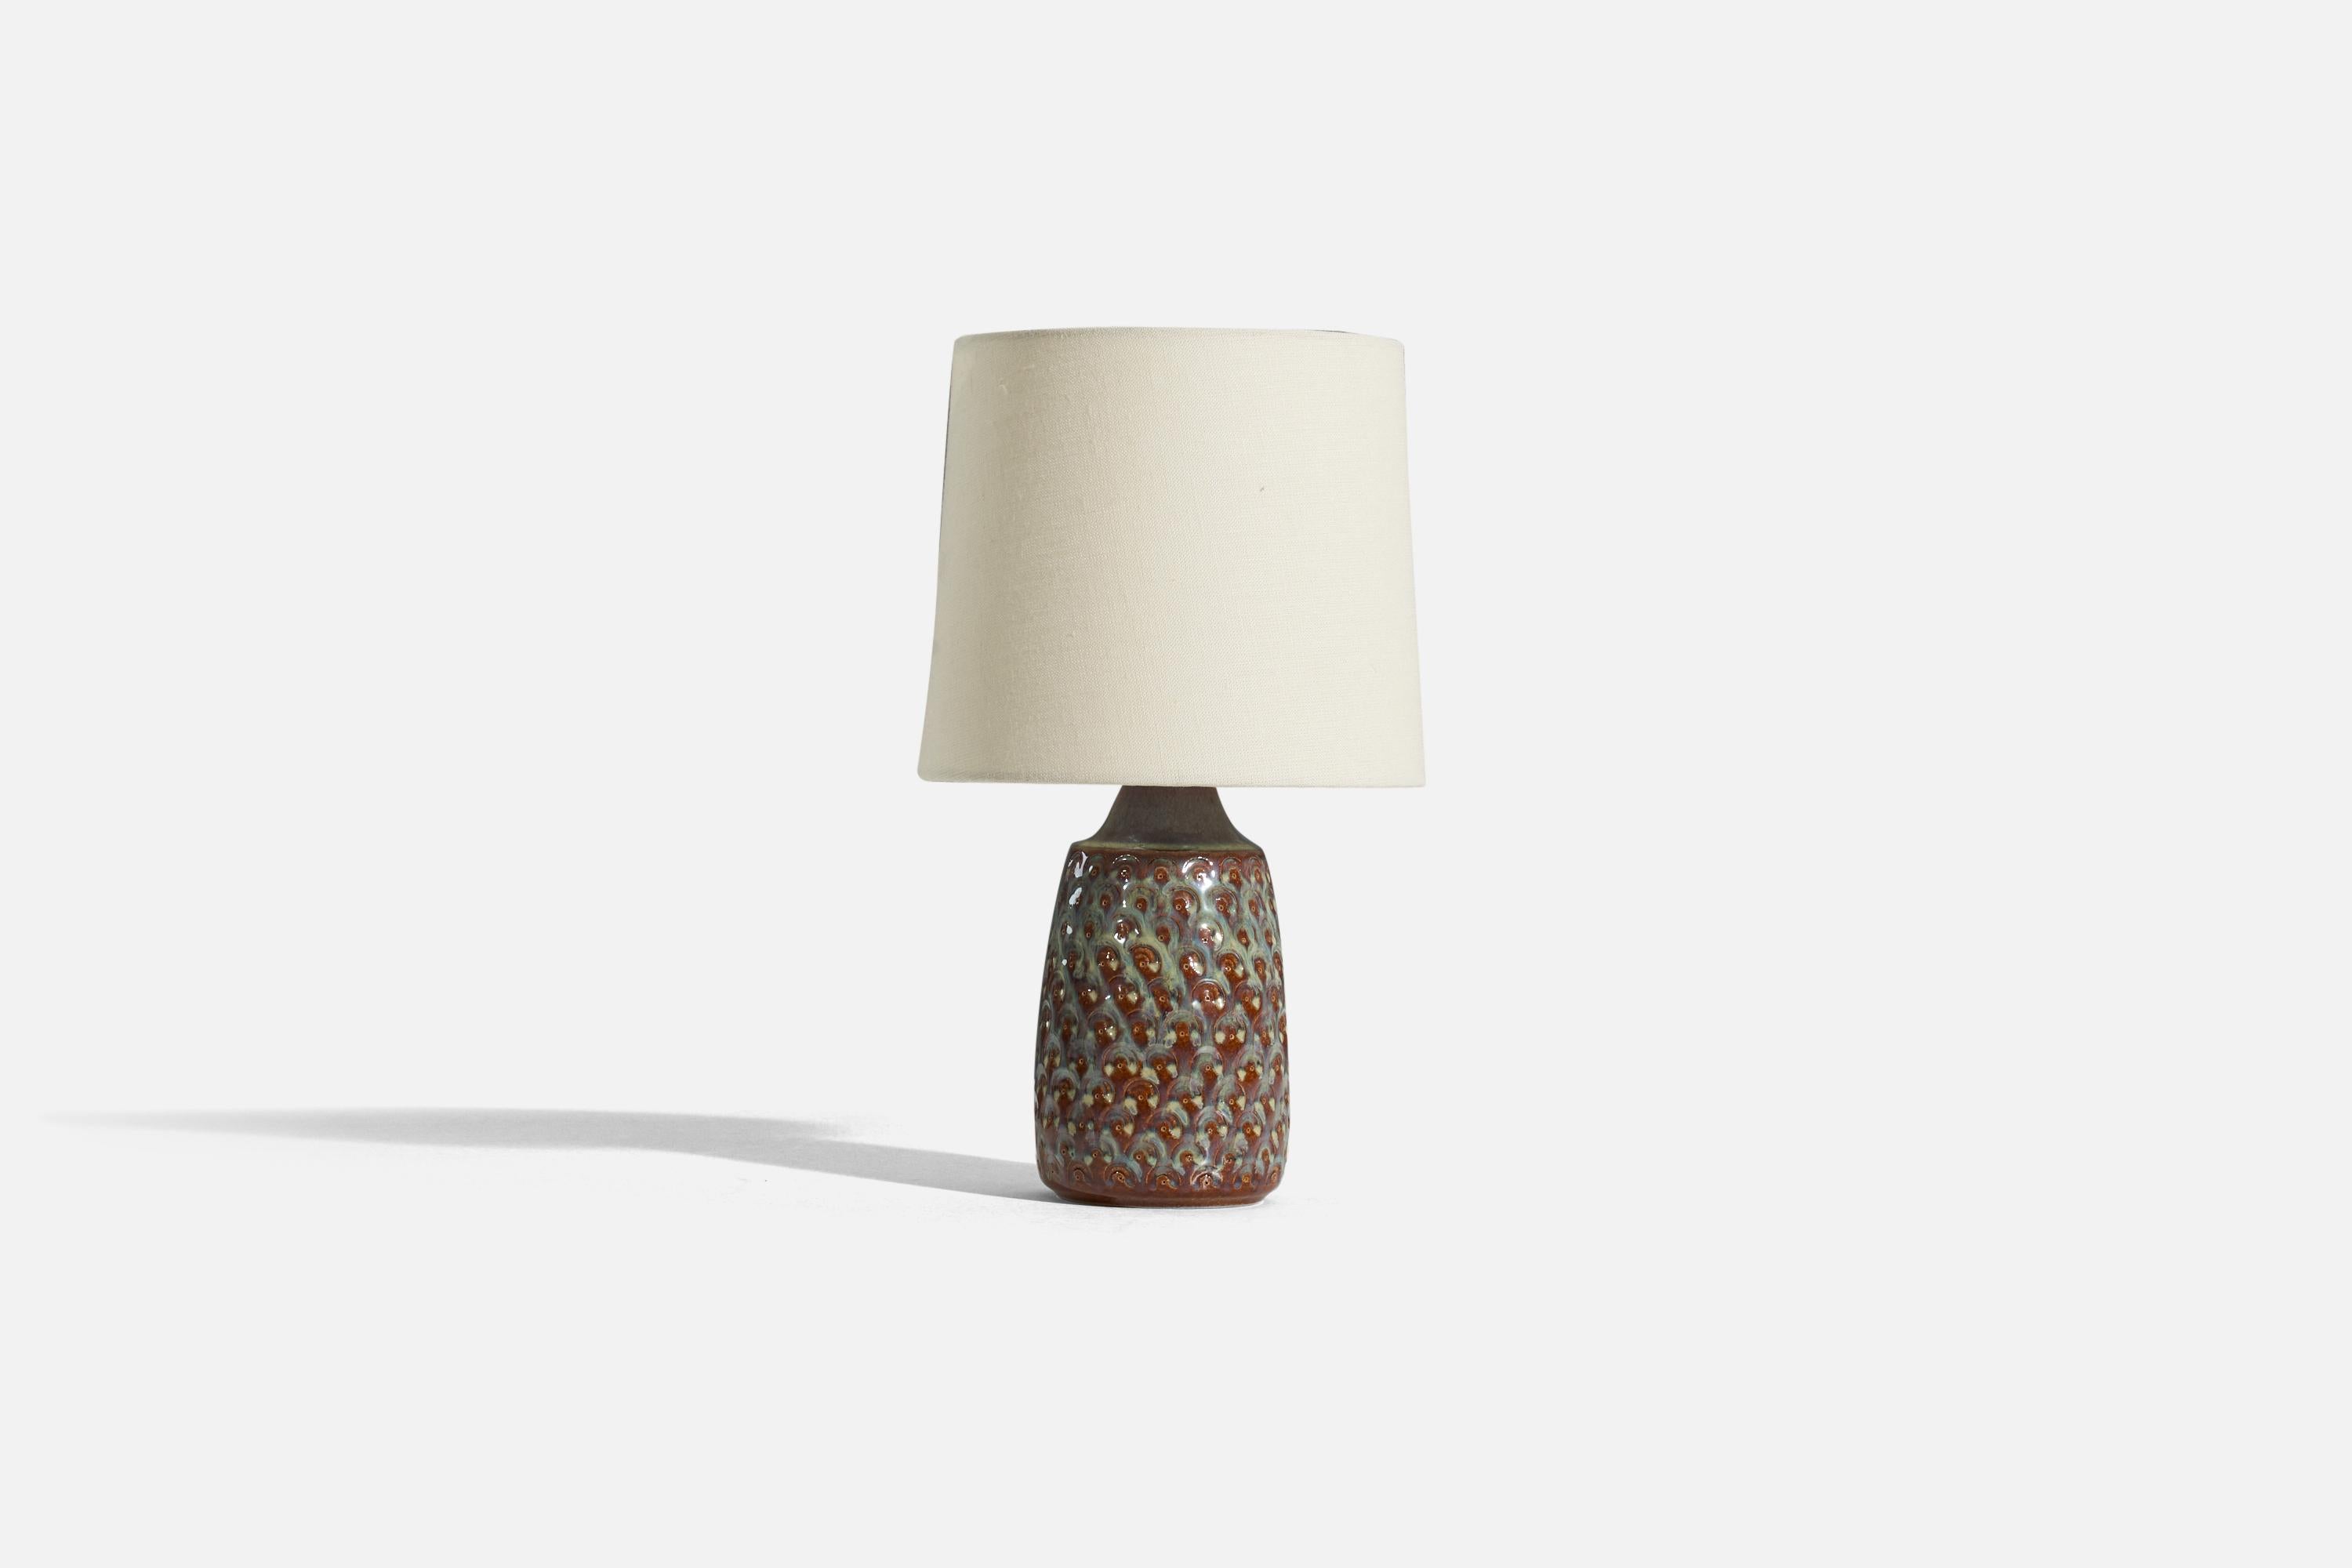 A brown and green, glazed stoneware table lamp designed and produced by Søholm Stentøj, Denmark, 1960s.

Sold without lampshade. 
Dimensions of Lamp (inches) : 9.5625 x 4.0625 x 4.0625 (H x W x D)
Dimensions of Shade (inches) : 7 x 8 x 7 (T x B